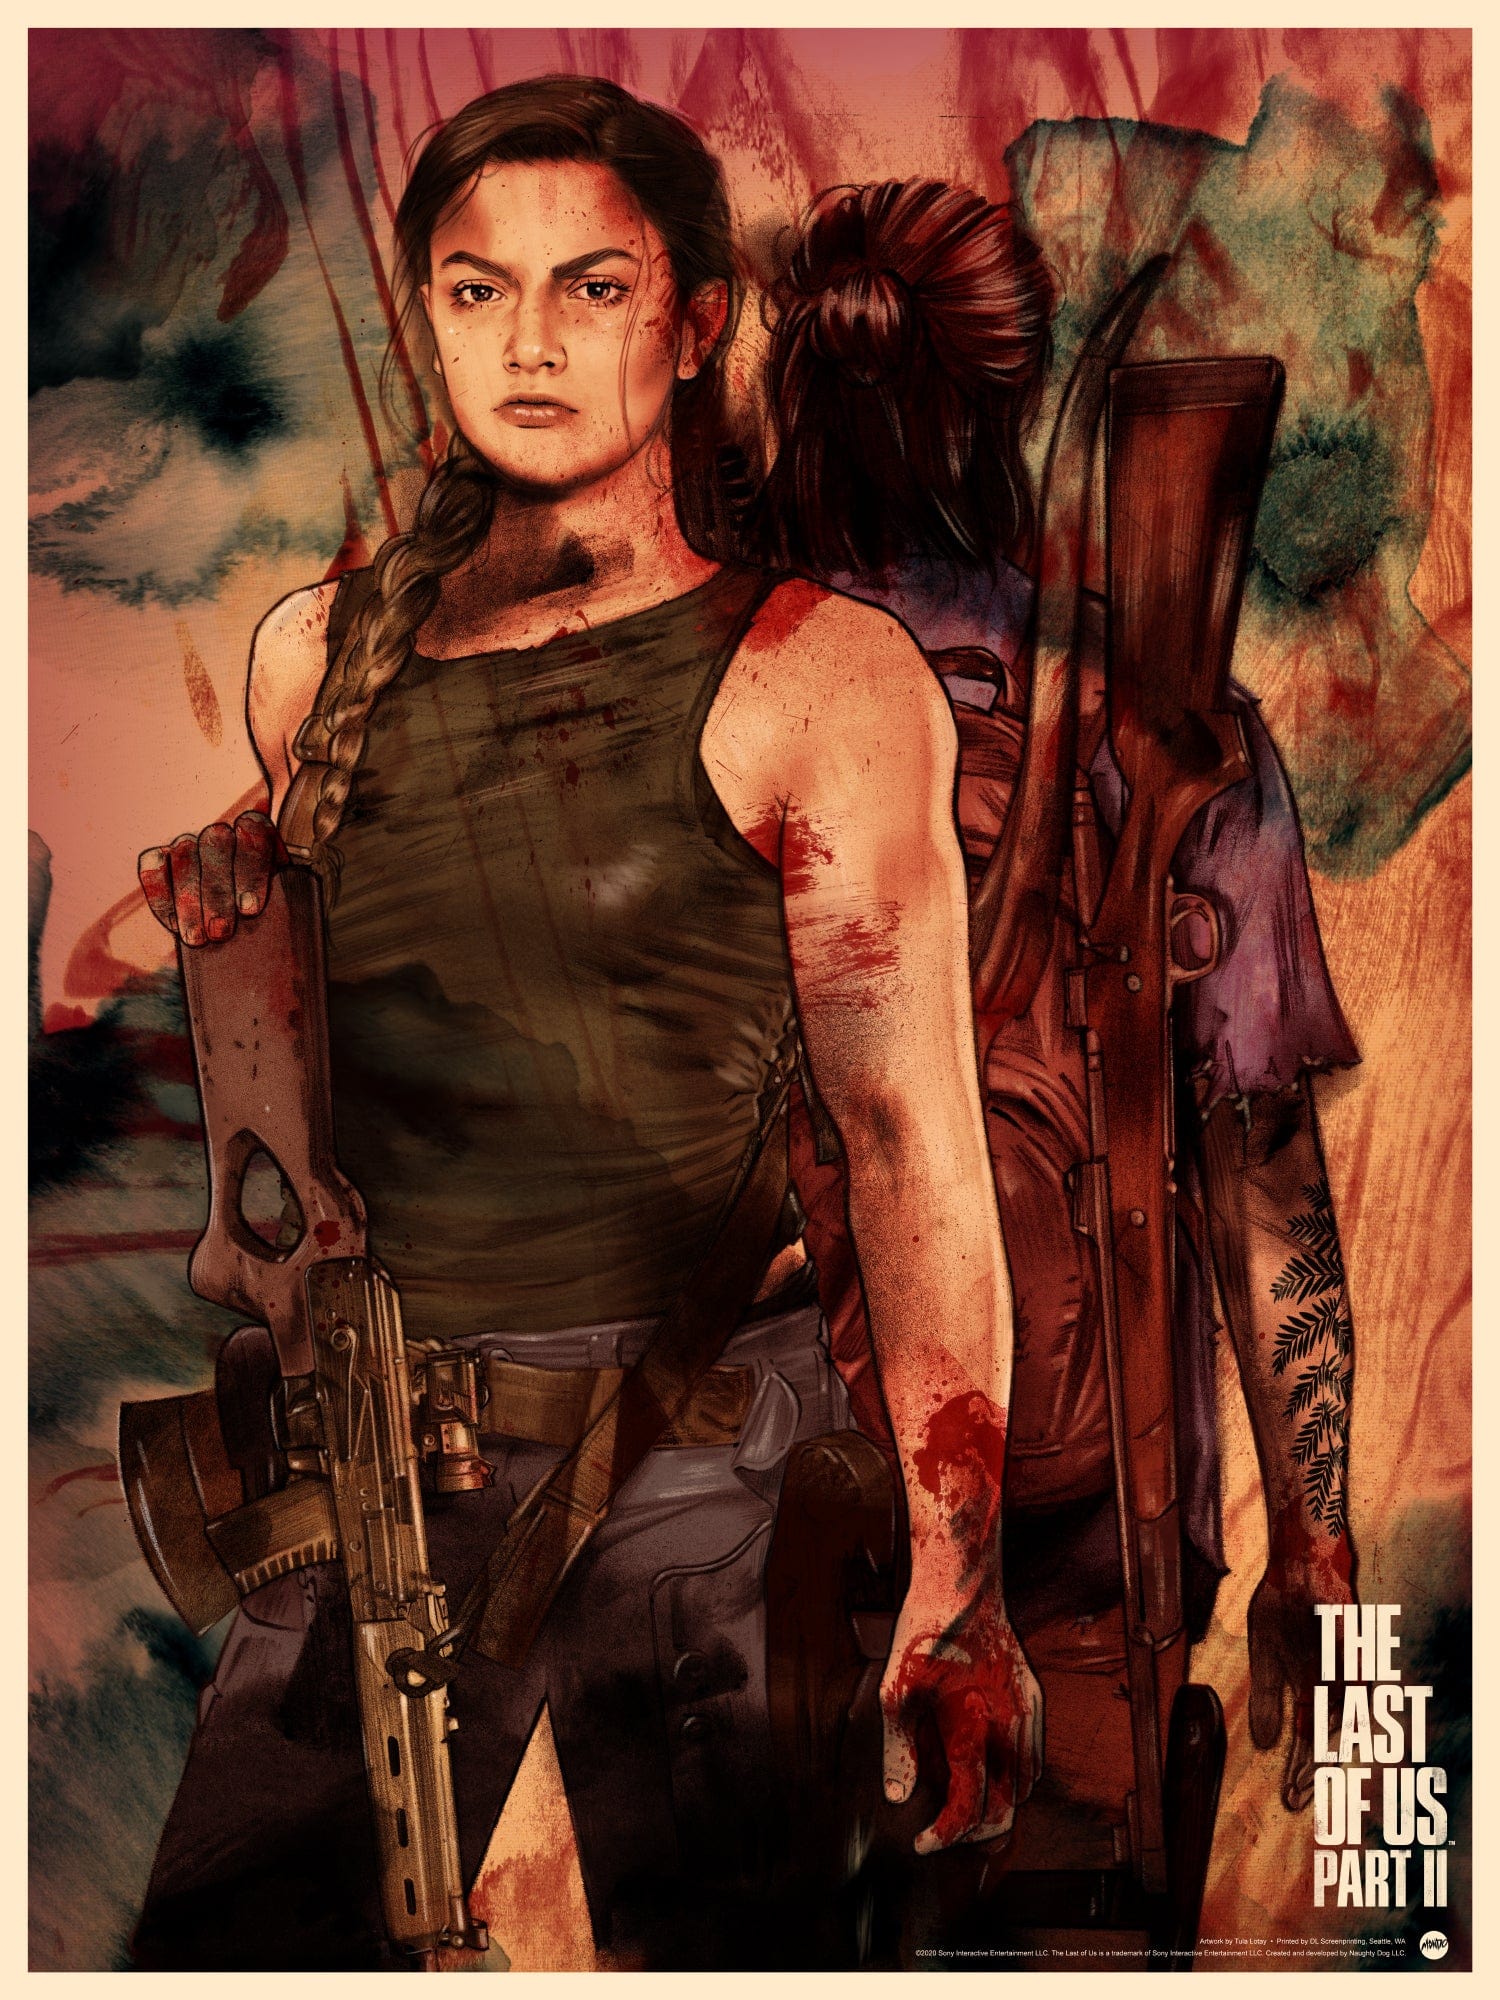 Naughty Dog, LLC - Revealed for #TheLastofUsDay: these two new The Last of Us  Part II Ellie and Abby posters designed by the incredible Tula Lotay,  available as timed-editions from Mondo. Pre-orders